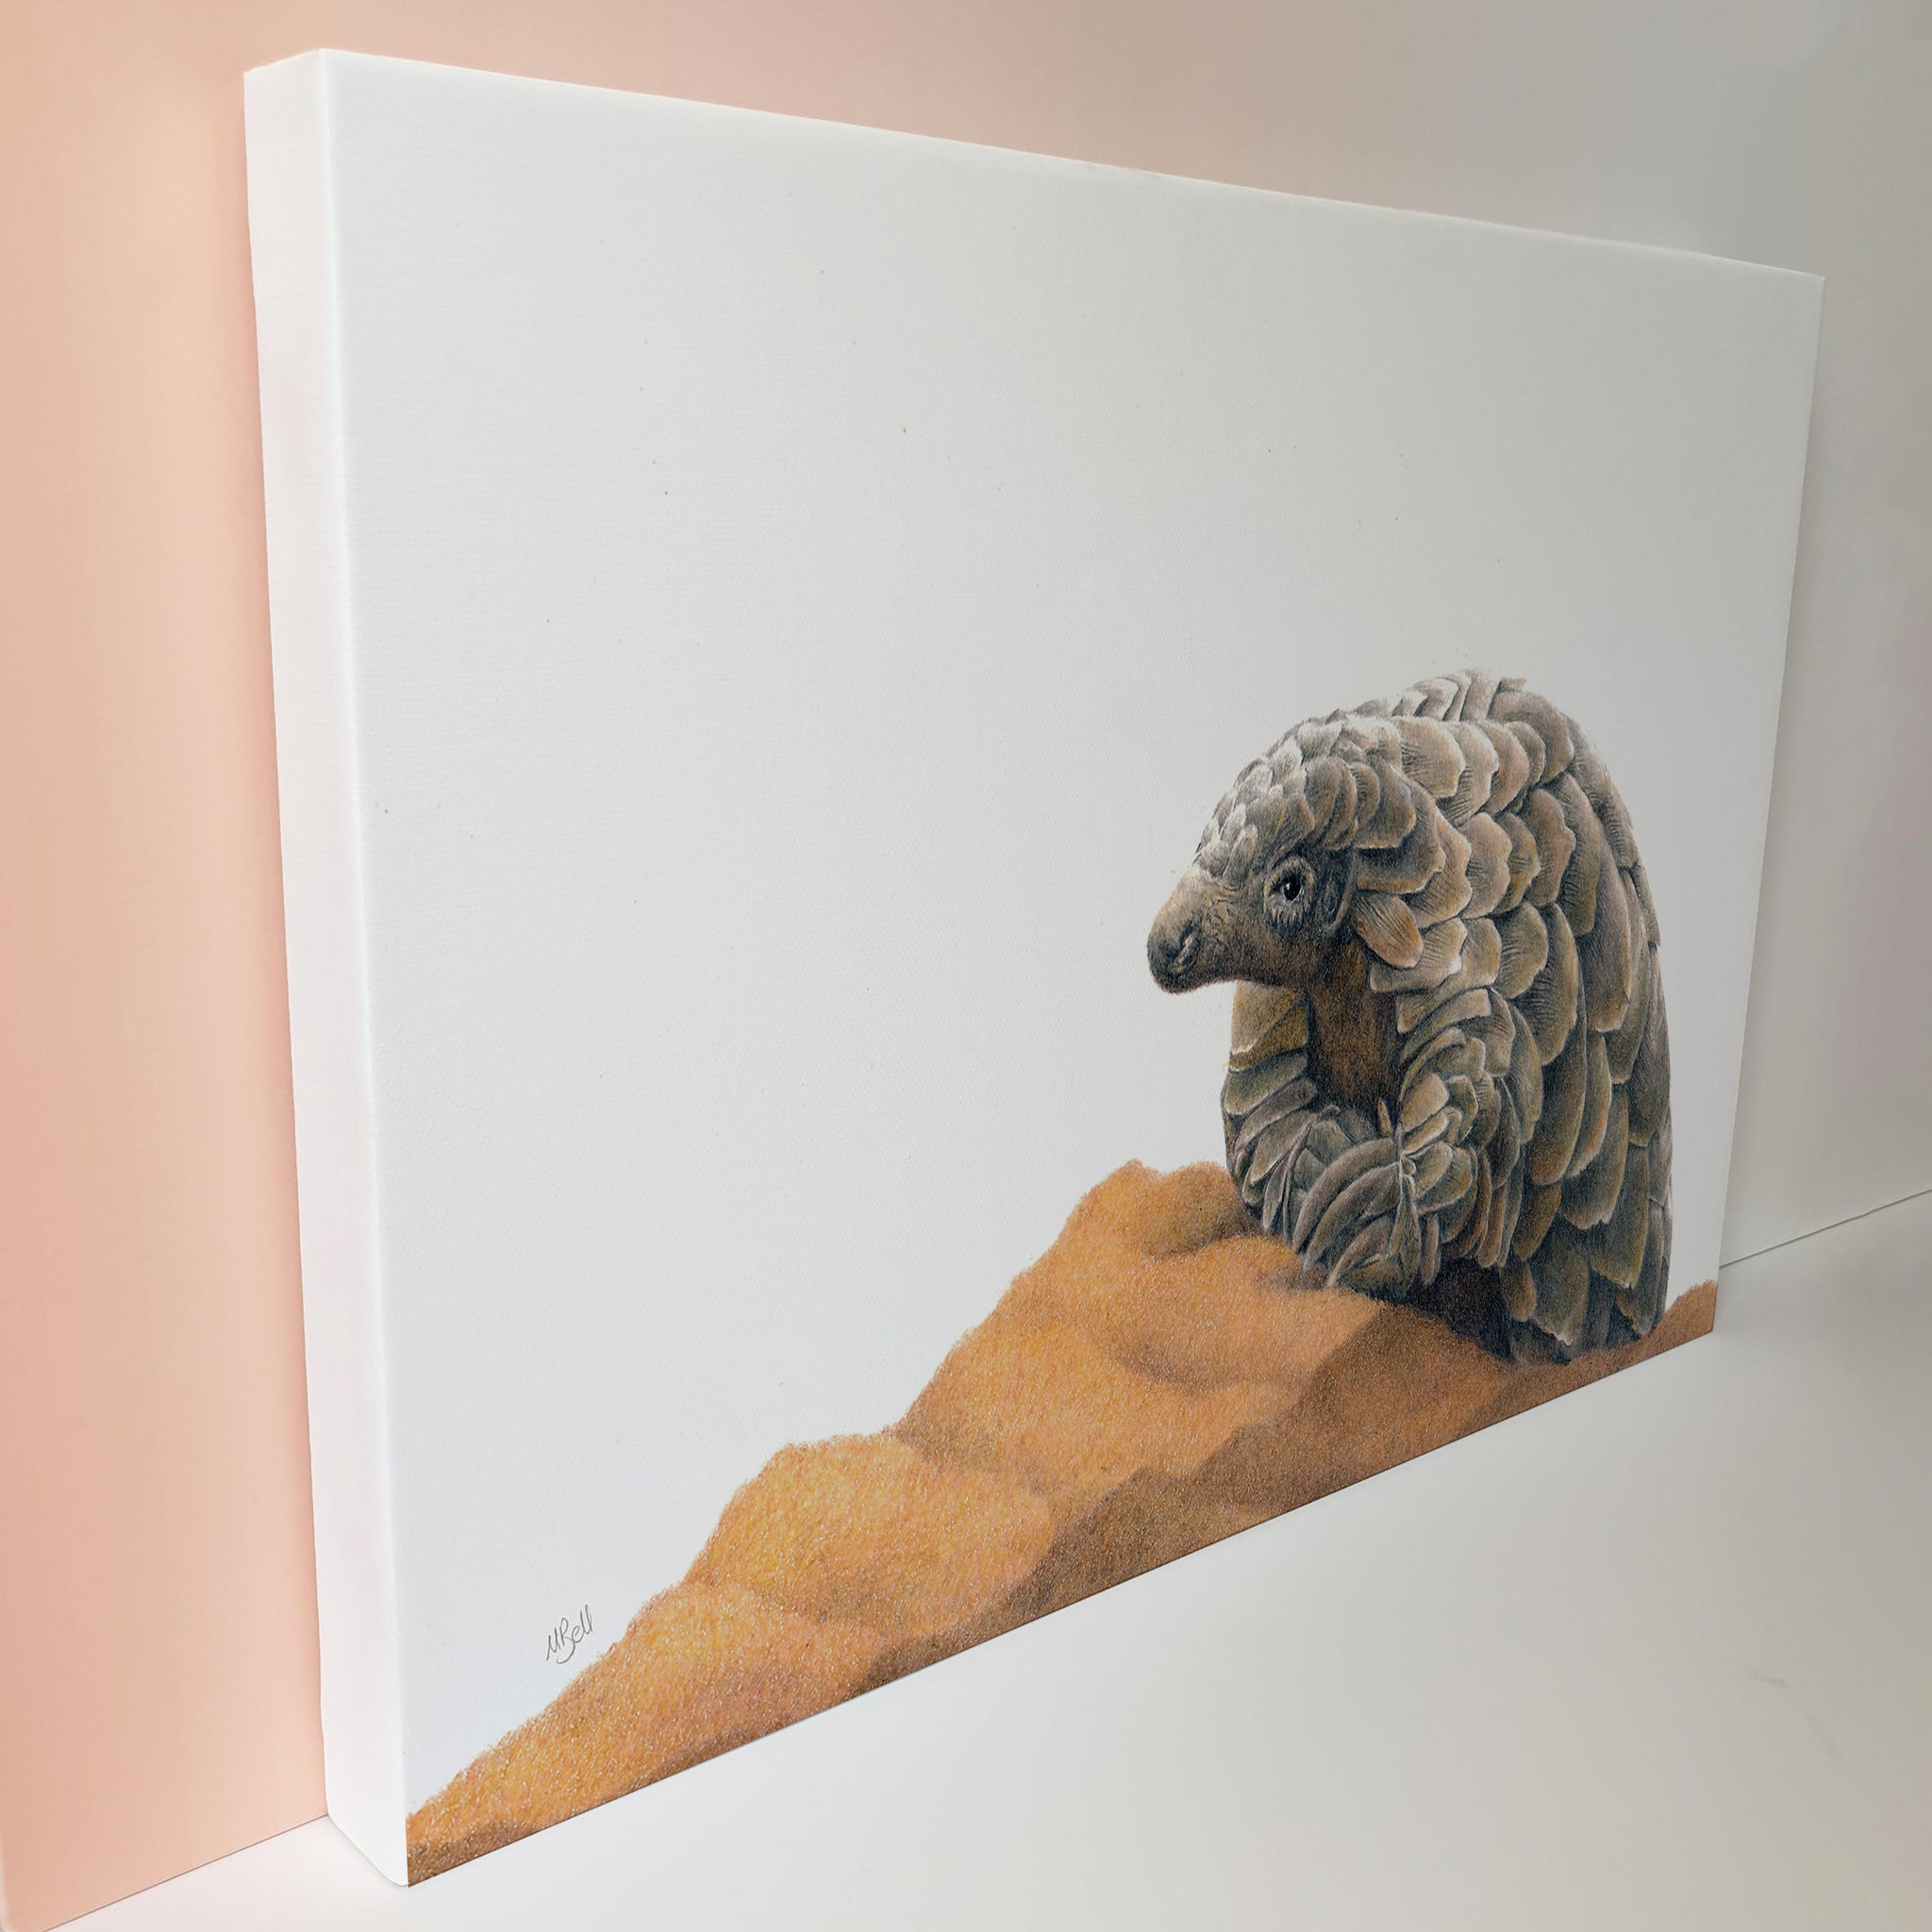 South African artwork of a Pangolin on canvas